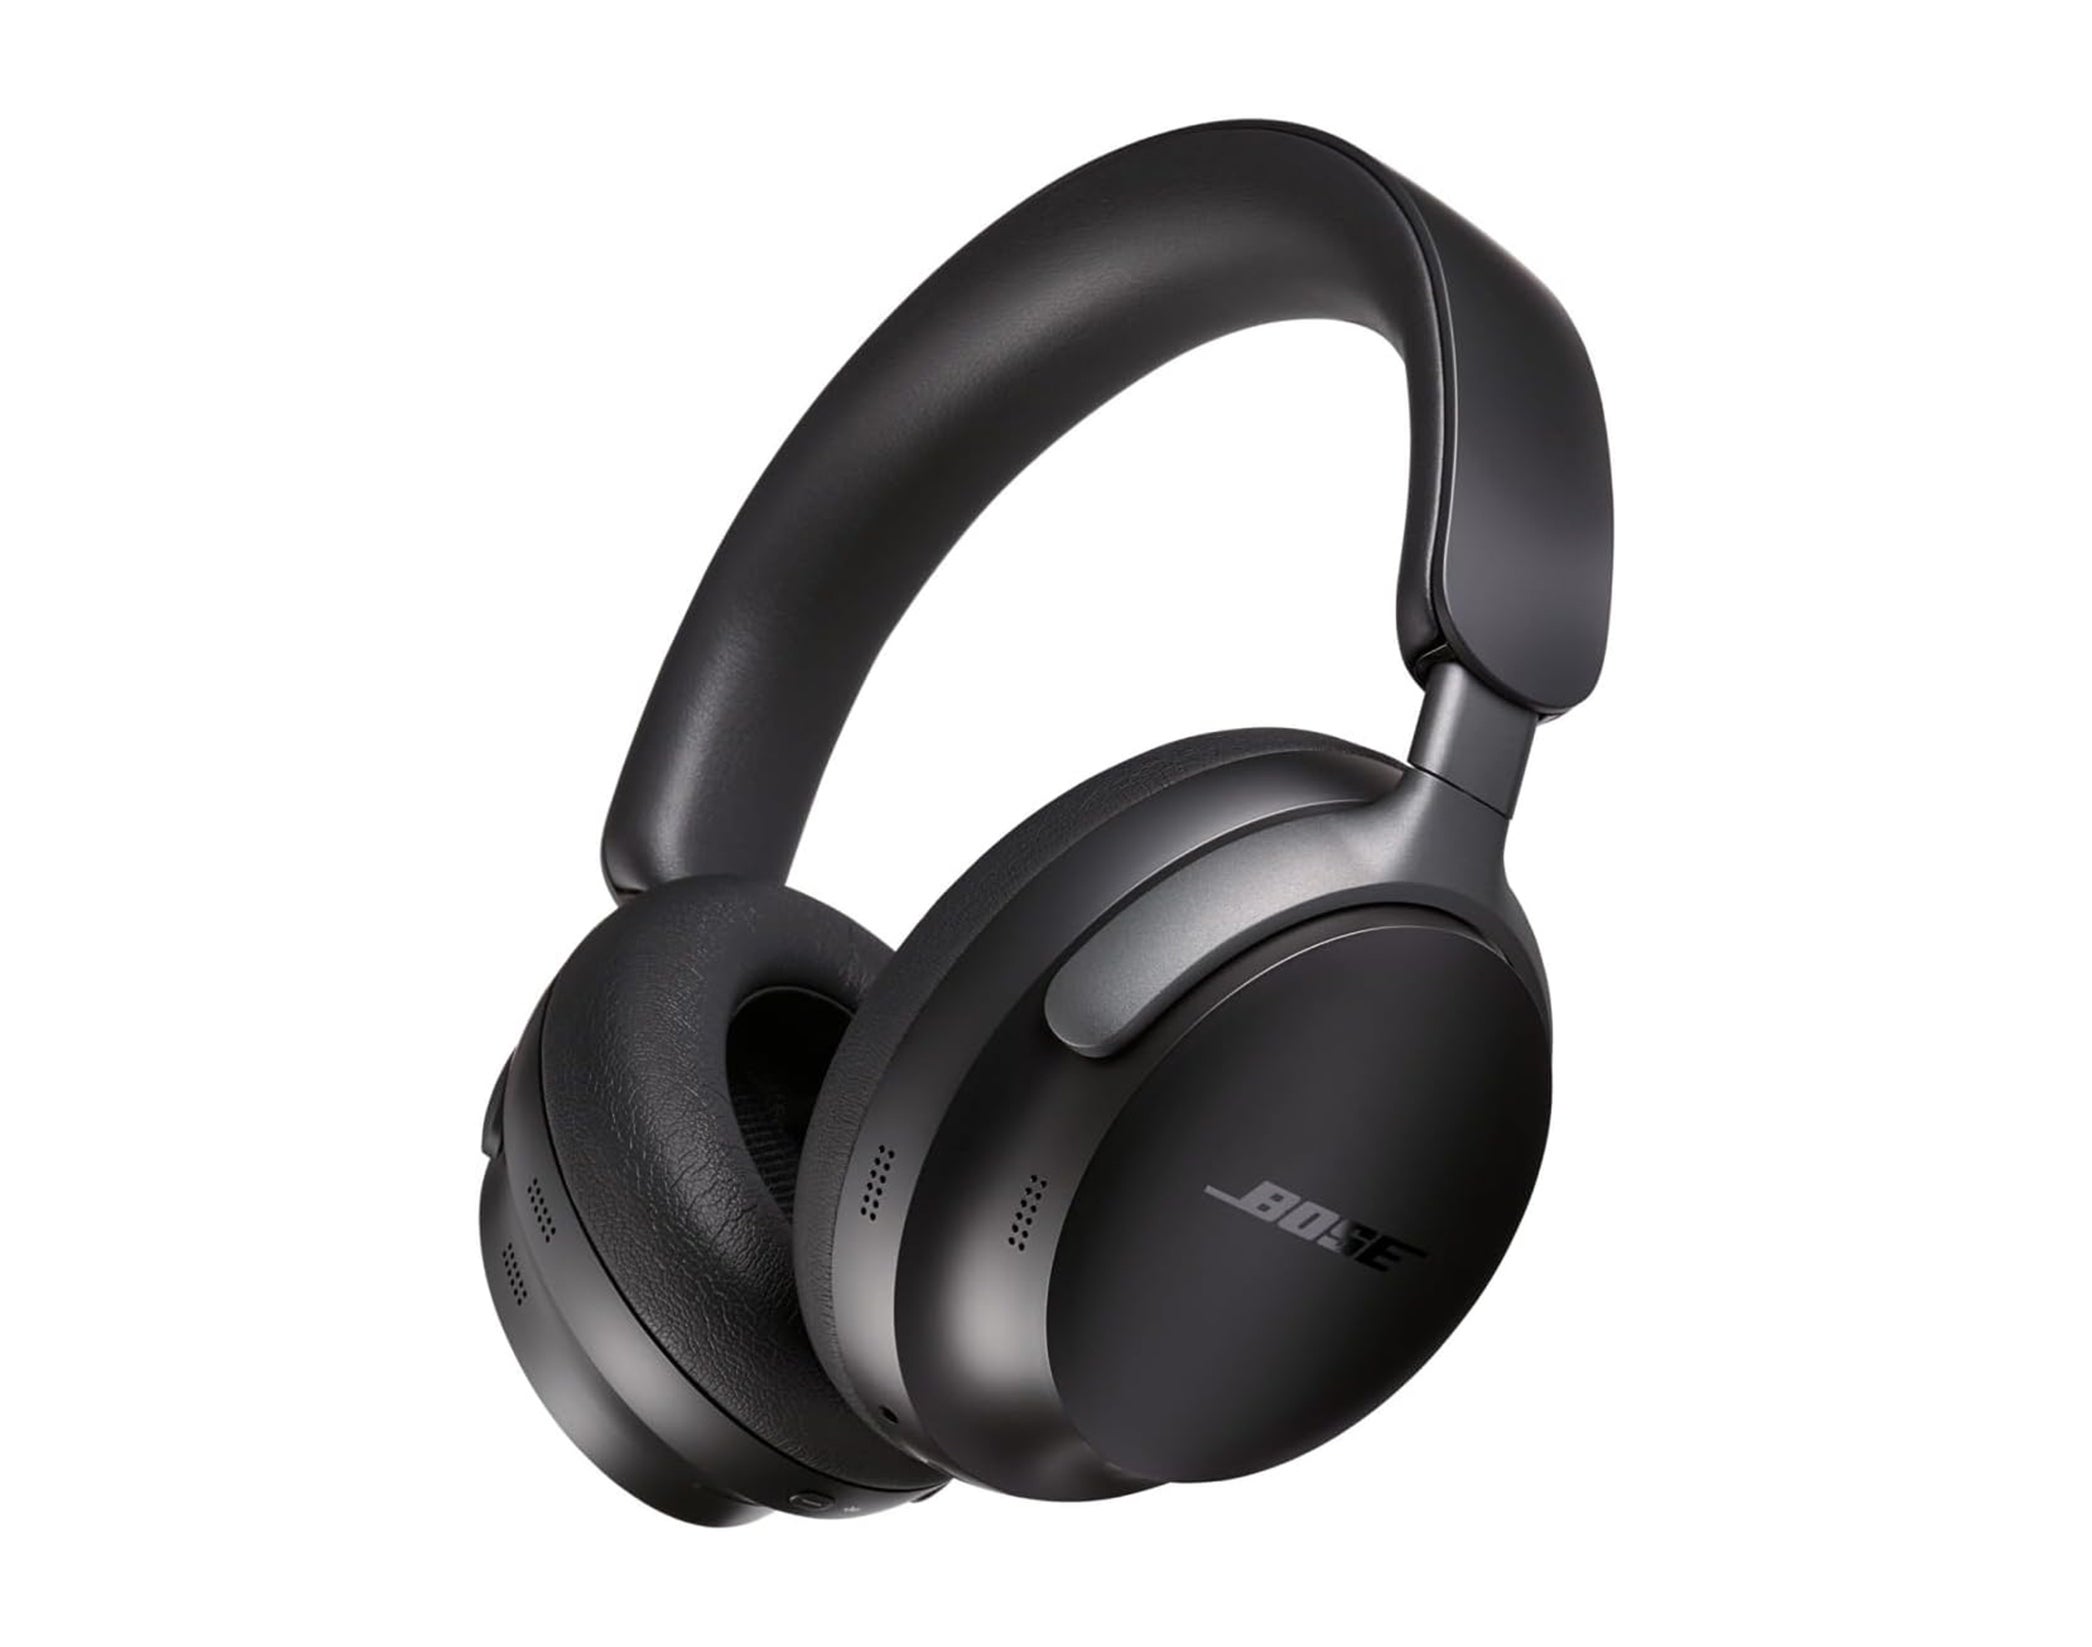 black friday, bose, airpods, indybest, amazon, android, black friday, best cyber monday headphones and earbuds deals on airpods, bose, sony and more